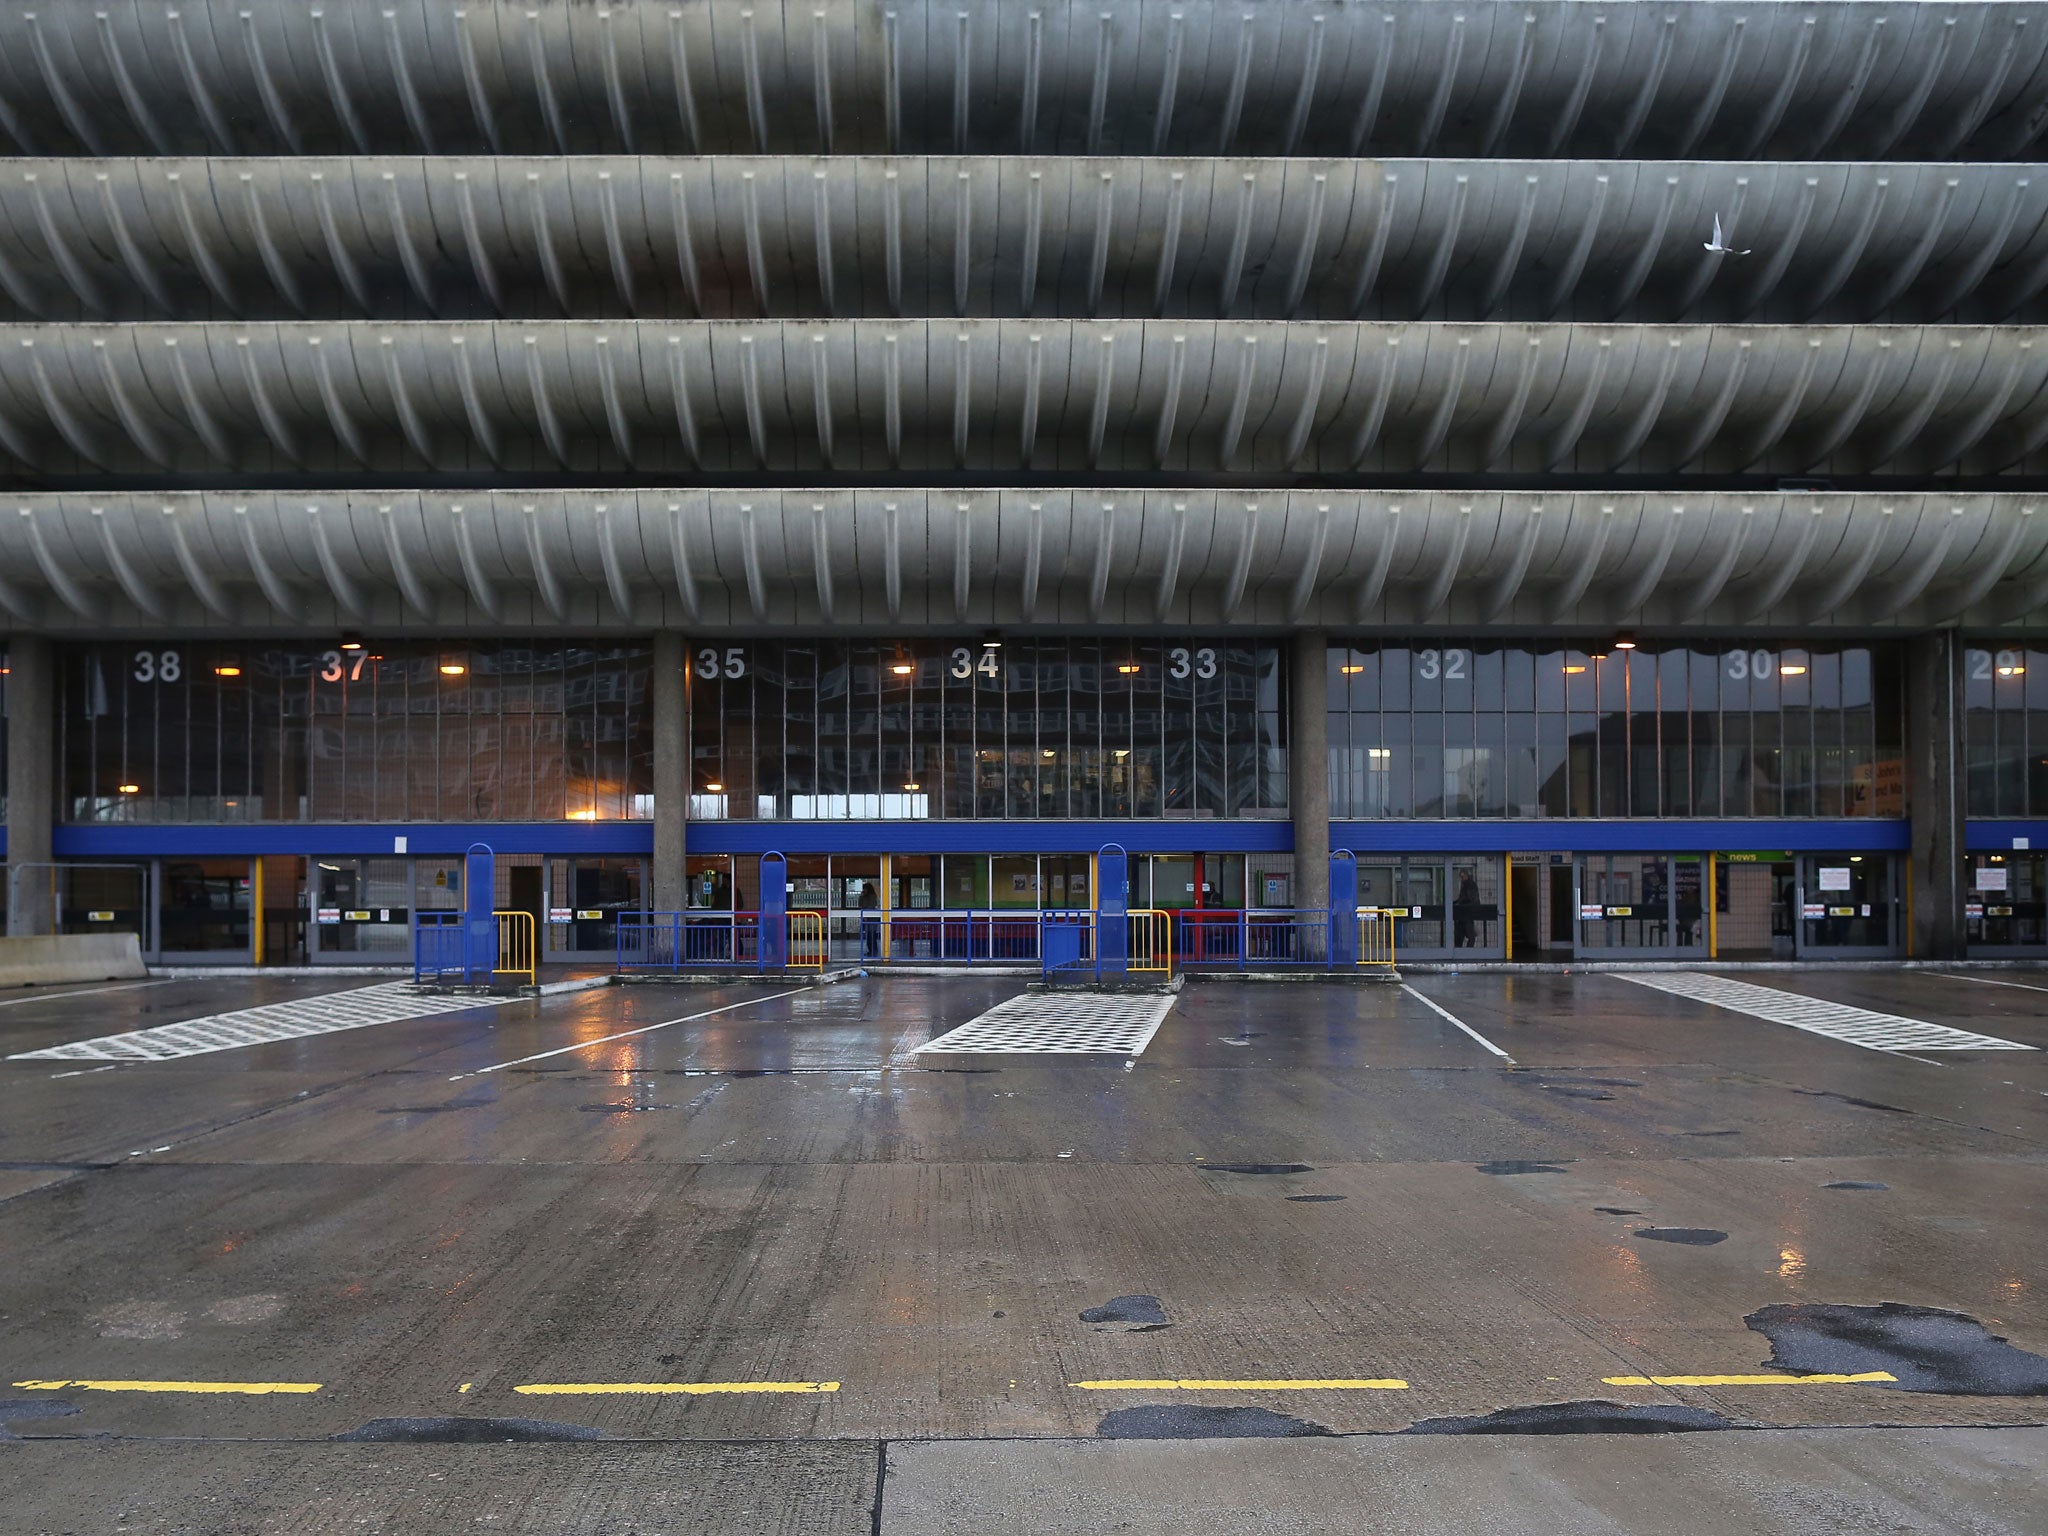 Preston Bus Station is described as great example of Brutalist architecture